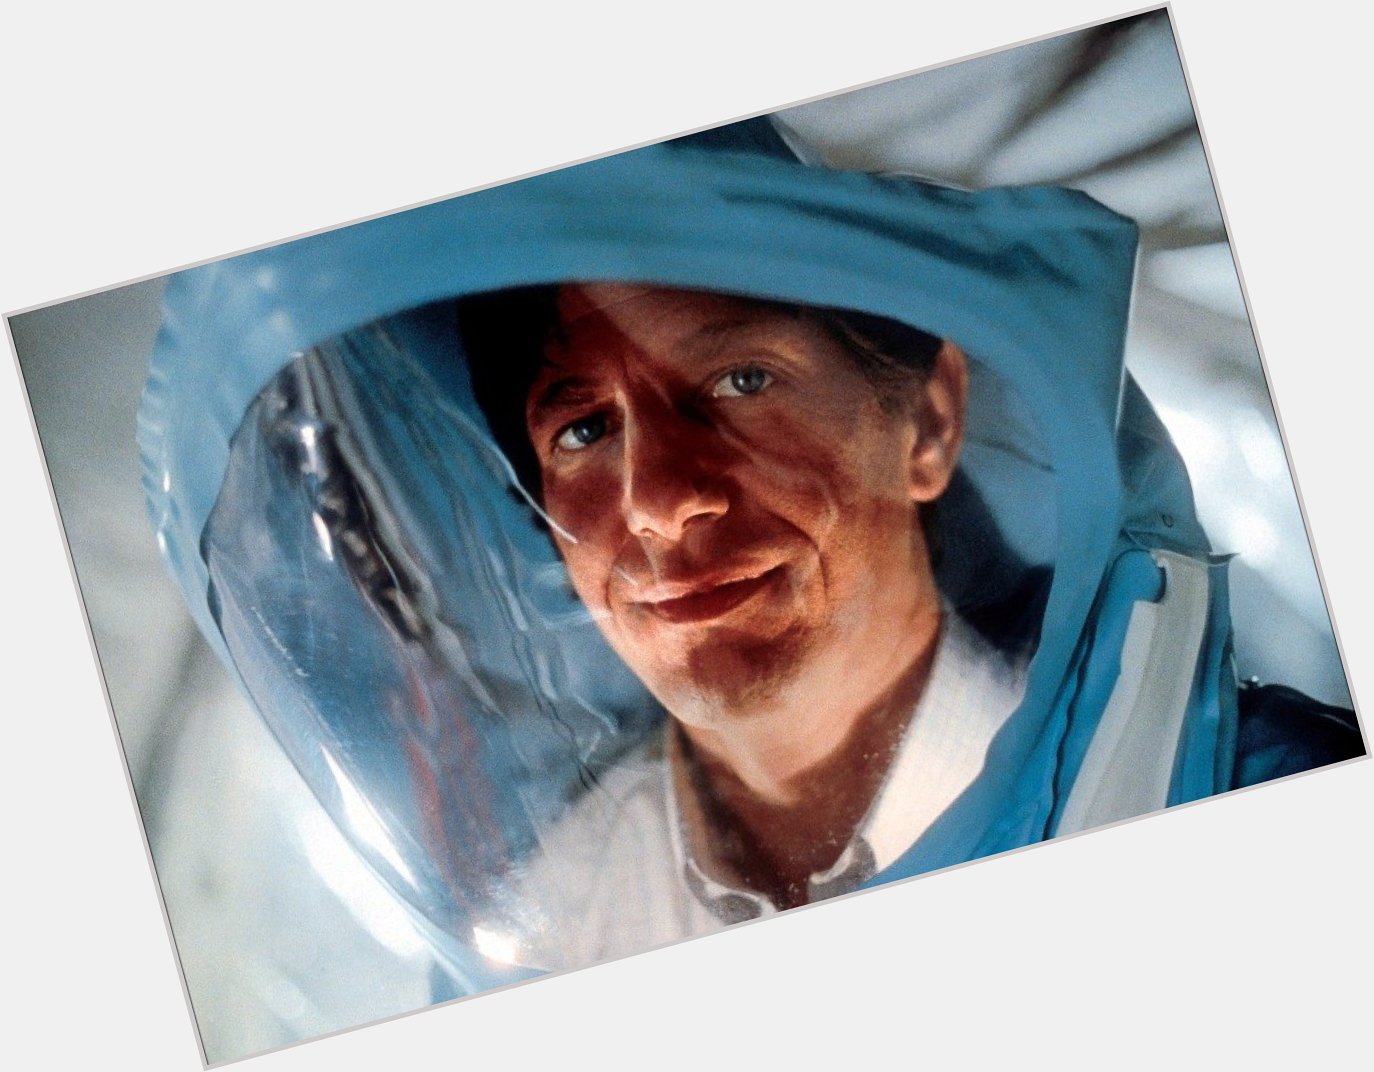 Happy Birthday to Peter Coyote, here in E.T. THE EXTRA-TERRESTRIAL! 